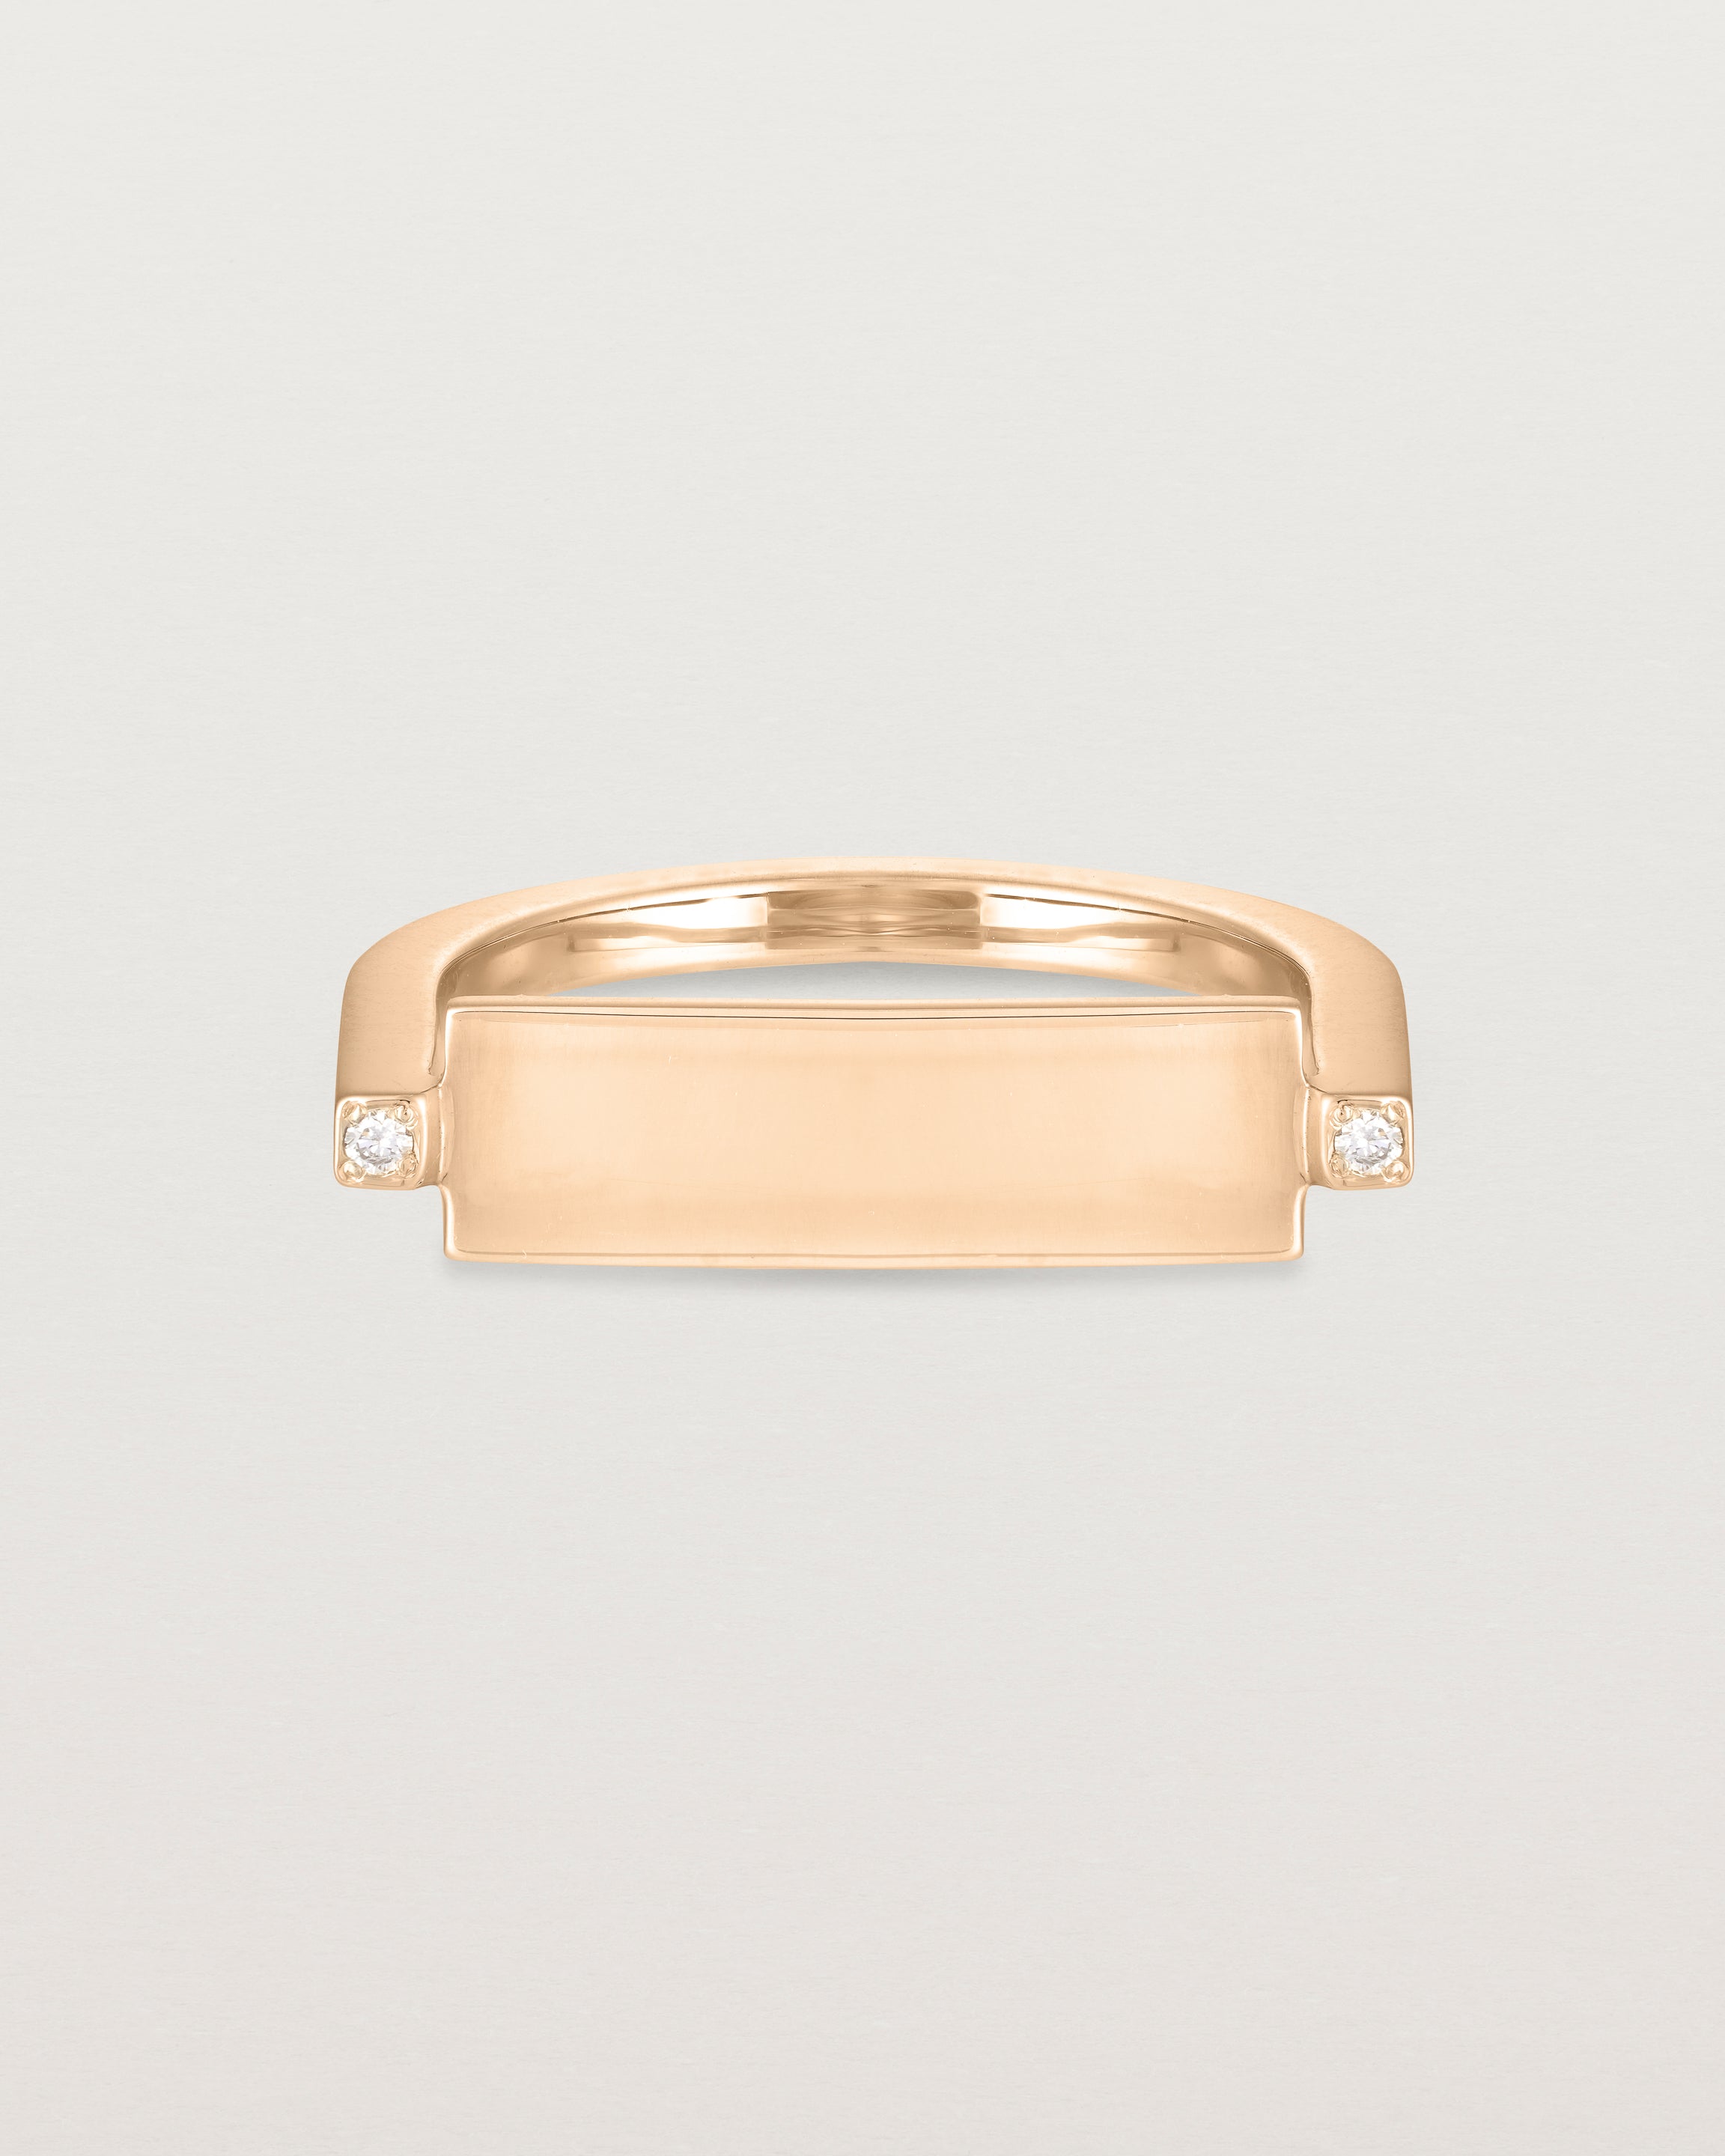 Front view of the Antares Plate Ring | Diamonds | Rose Gold.